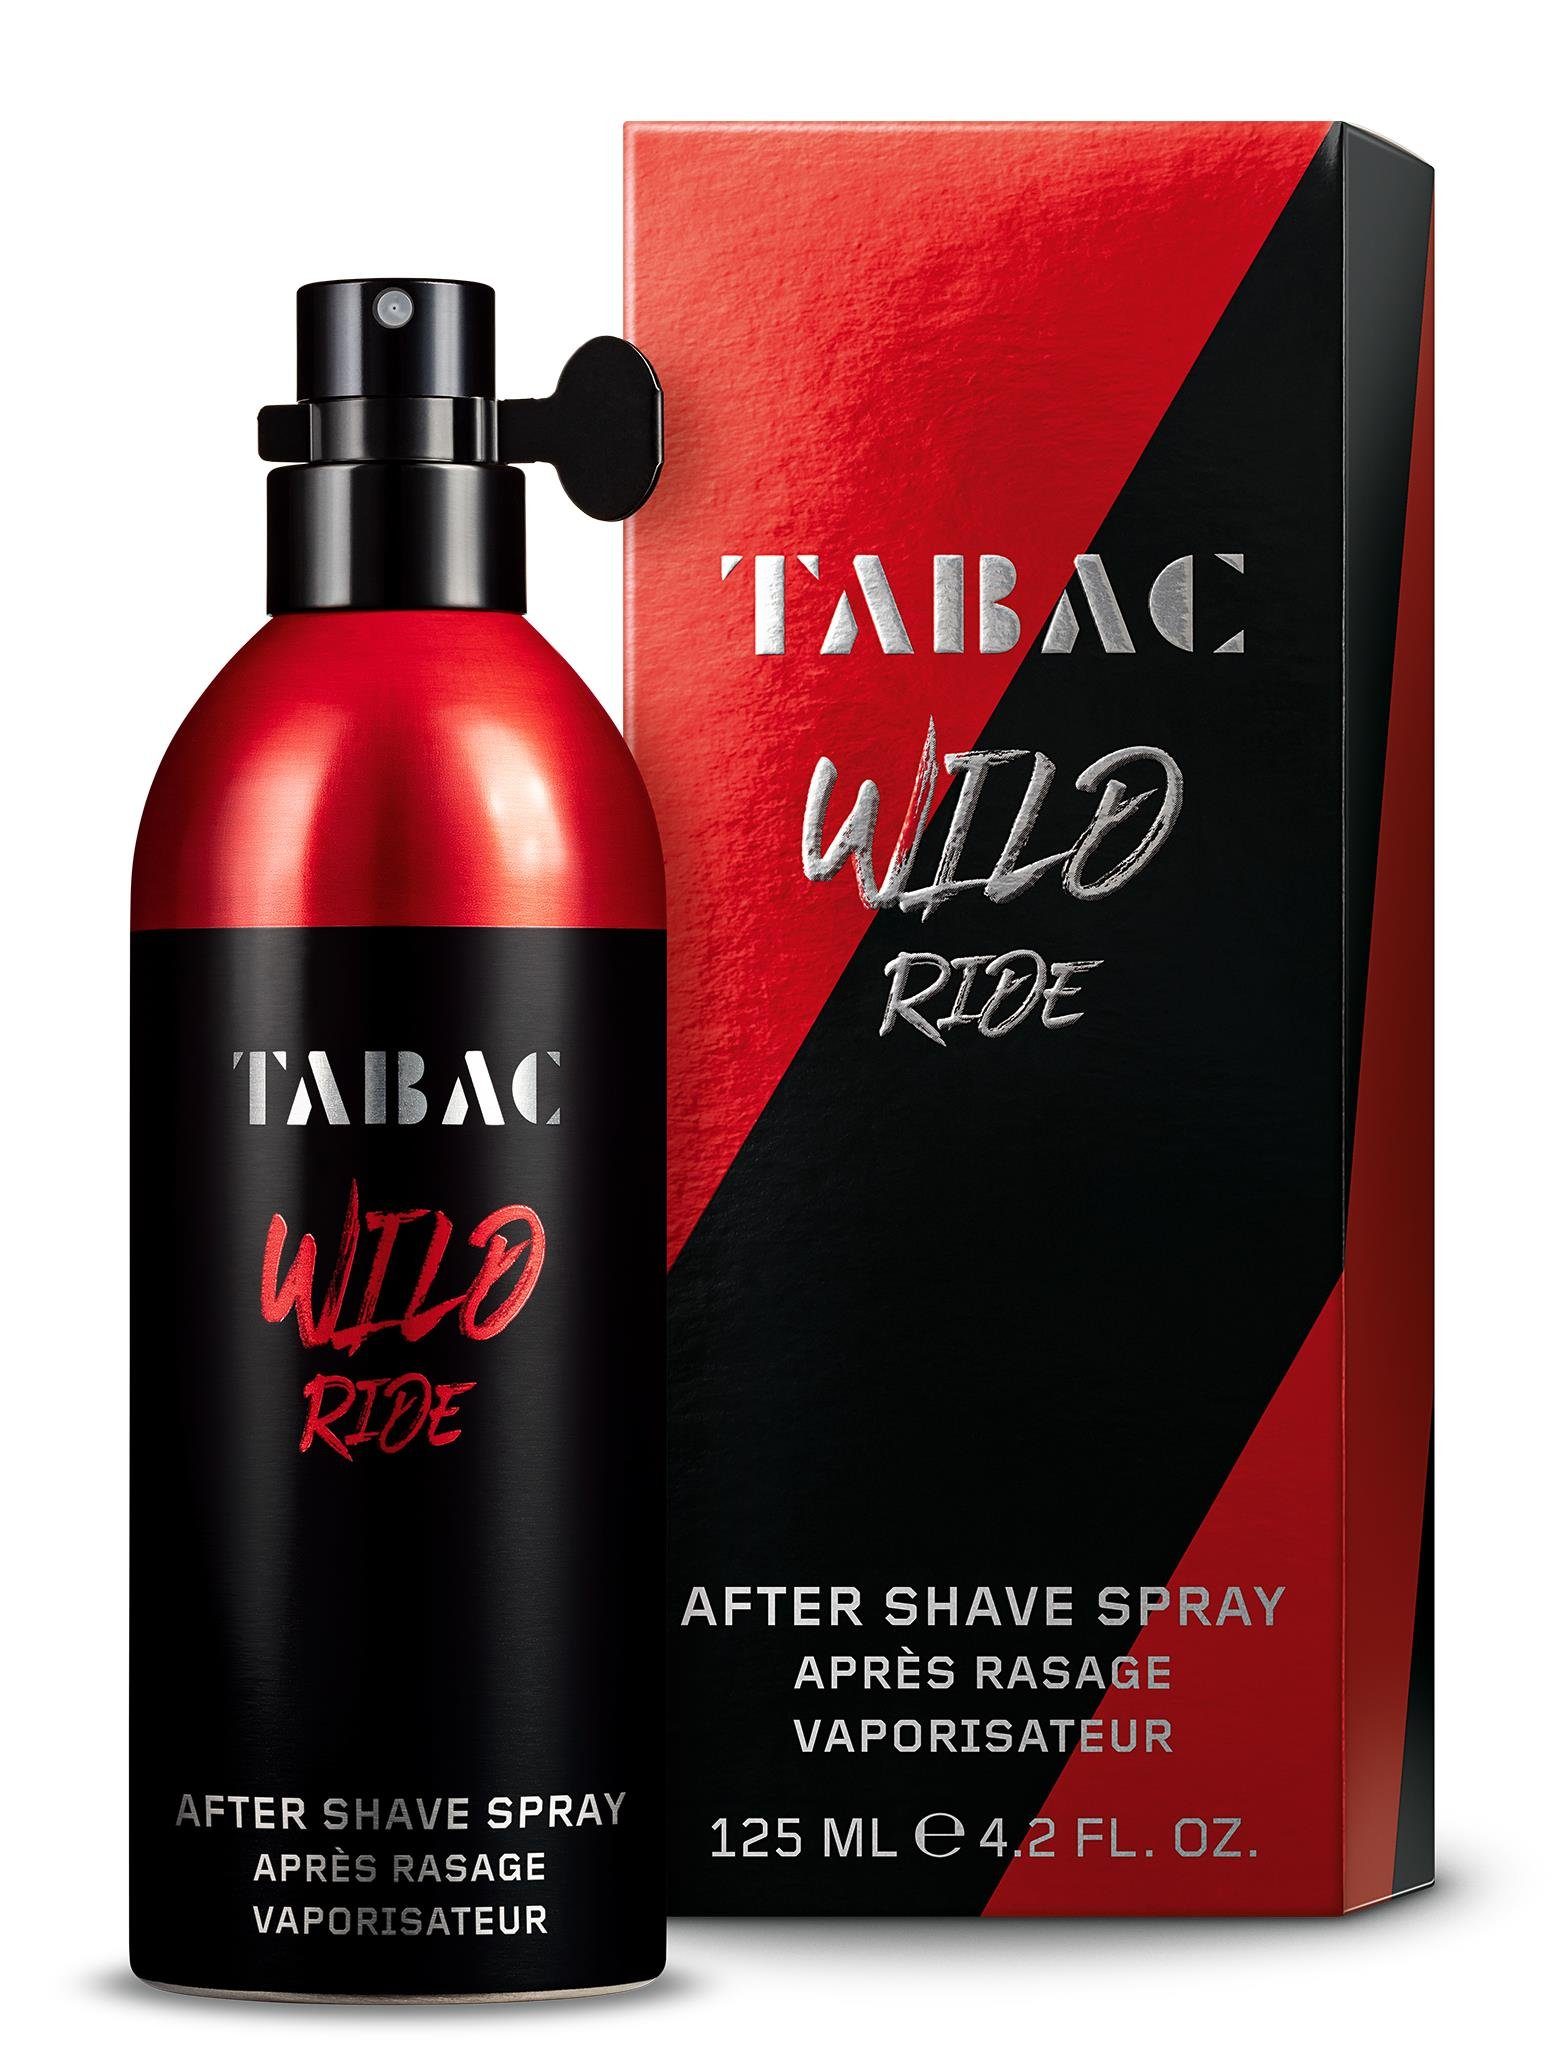 Tabac Ride Tabac 125 Shave Gesichts-Reinigungslotion Ride ml Wild Wild Lotion After